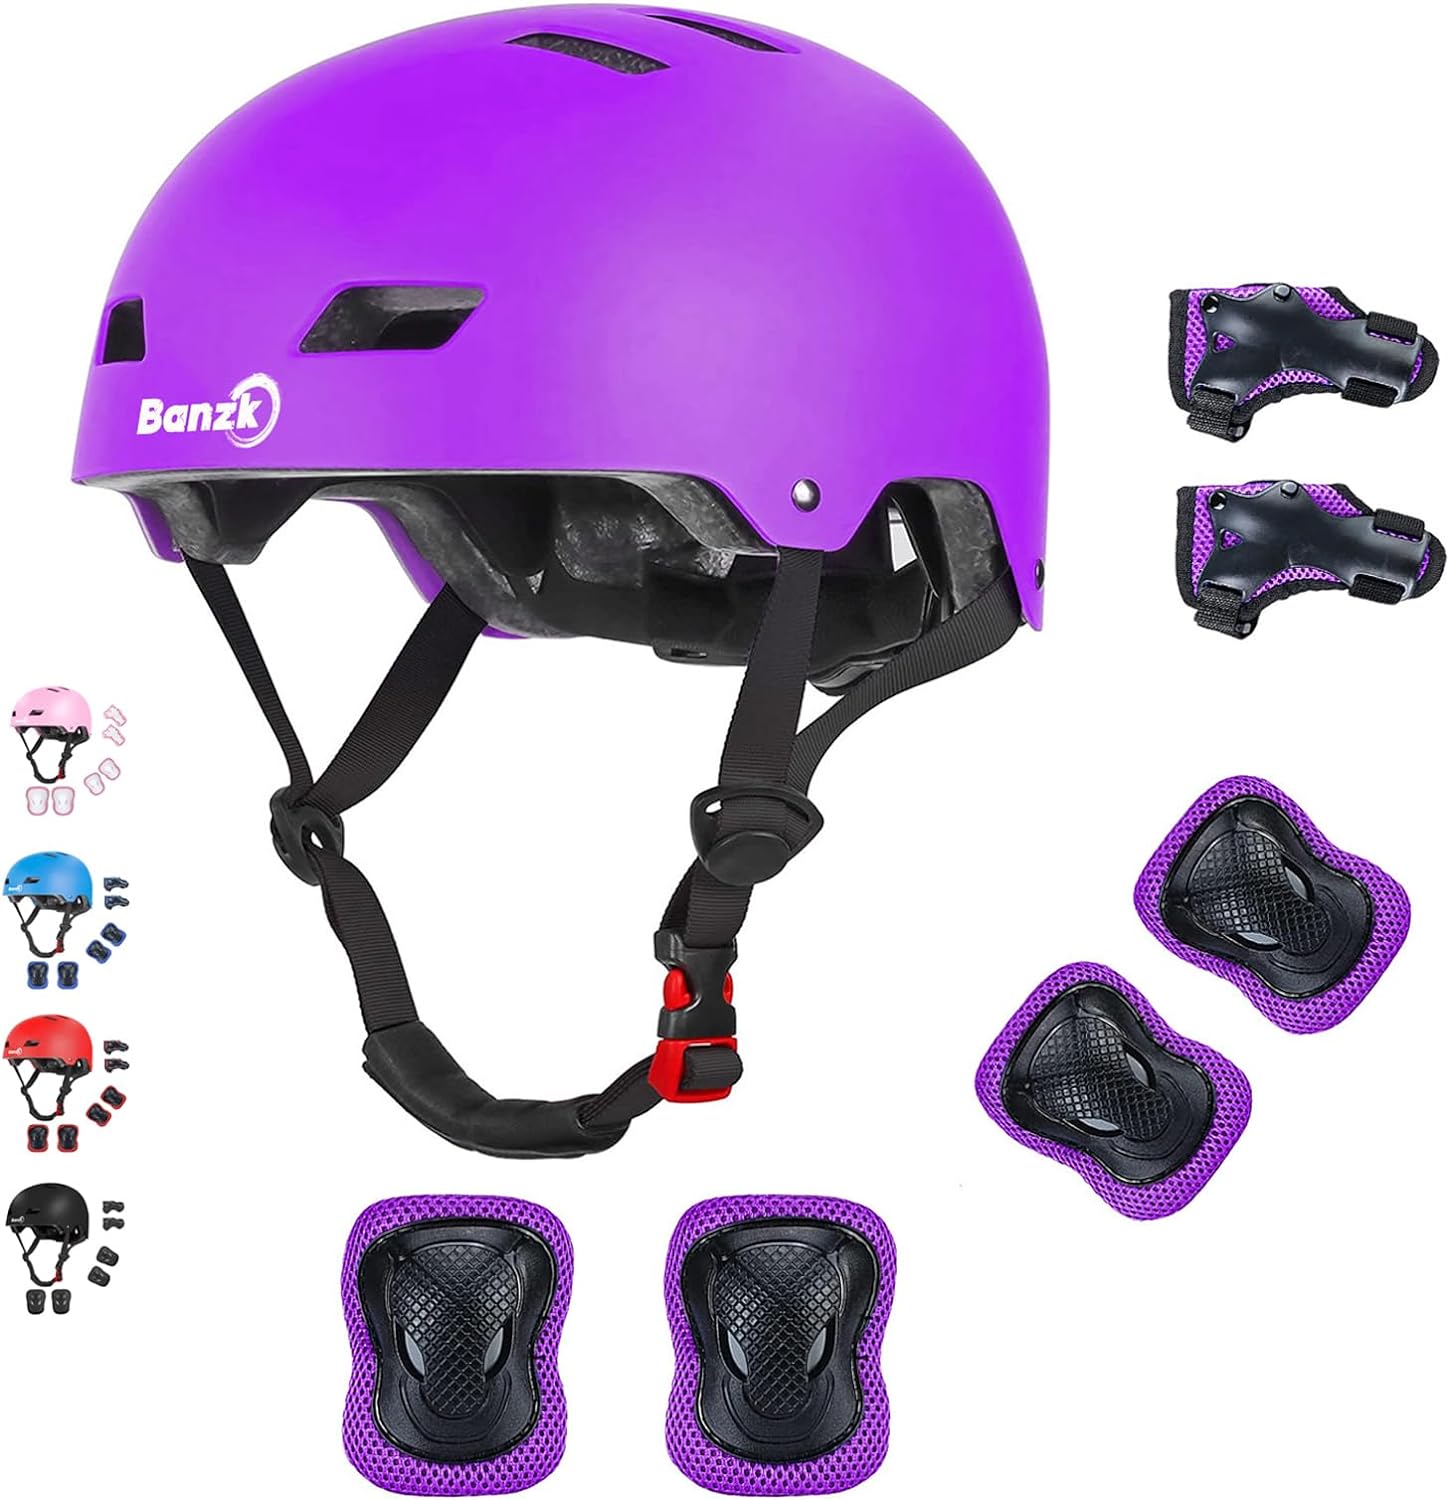 Banzk Kids Bike Helmet with Knee Pads Elbow Pads Wrist Guards for Age 3-14 Youth/Teens,Ventilation Multi-Sport Scooter Roller Skate Rollerblading Skateboarding Climbing Cycling